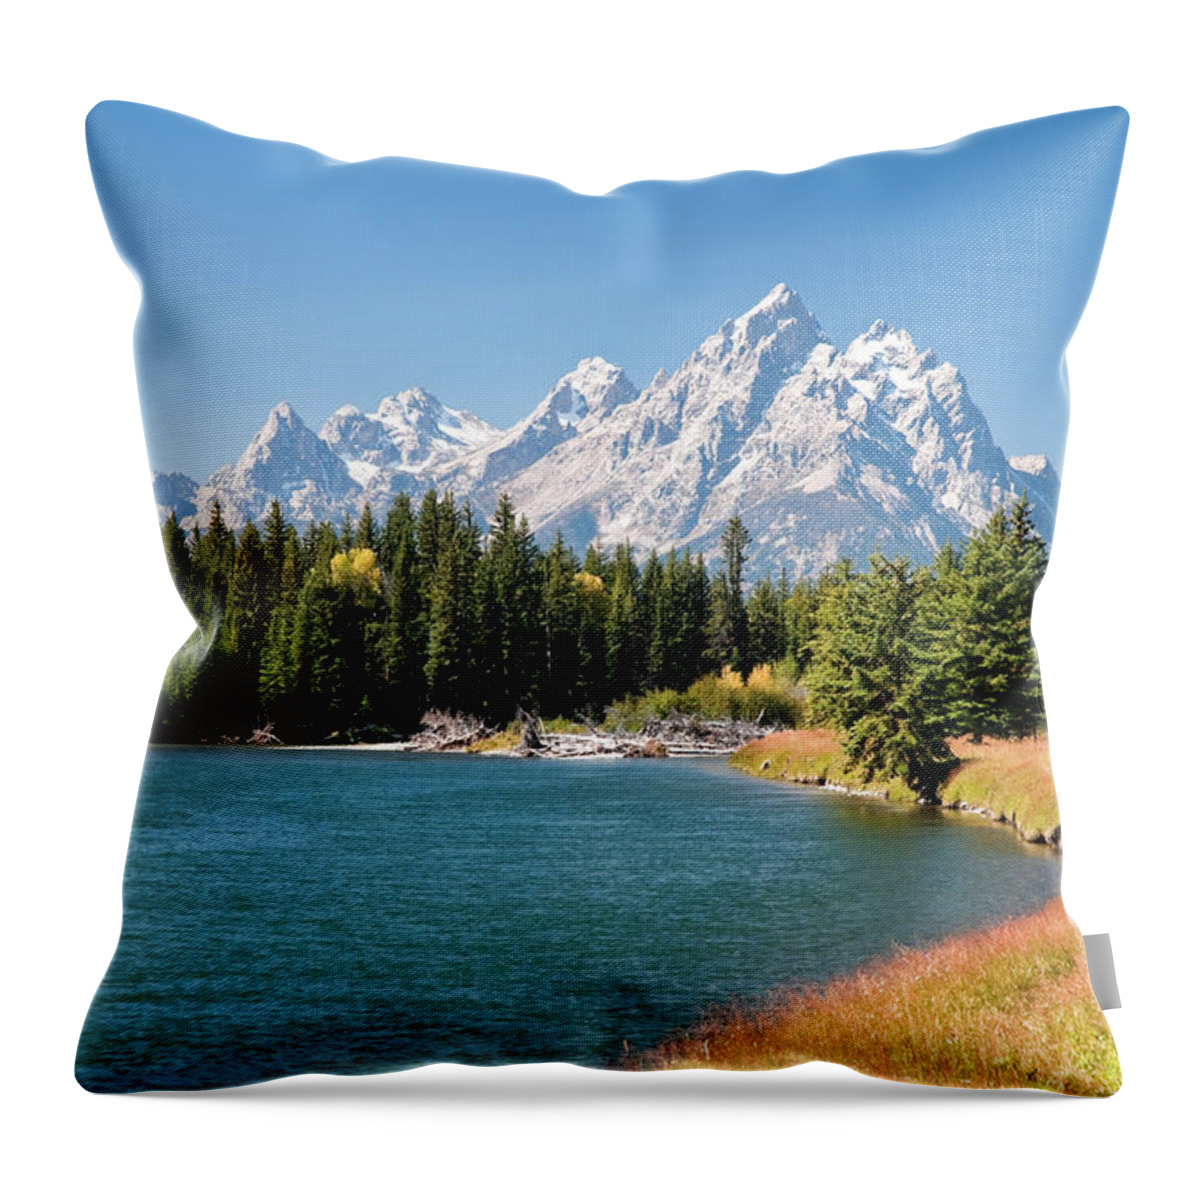 Geology Throw Pillow featuring the photograph Grand Tetons Mountians And The Snake by Skibreck